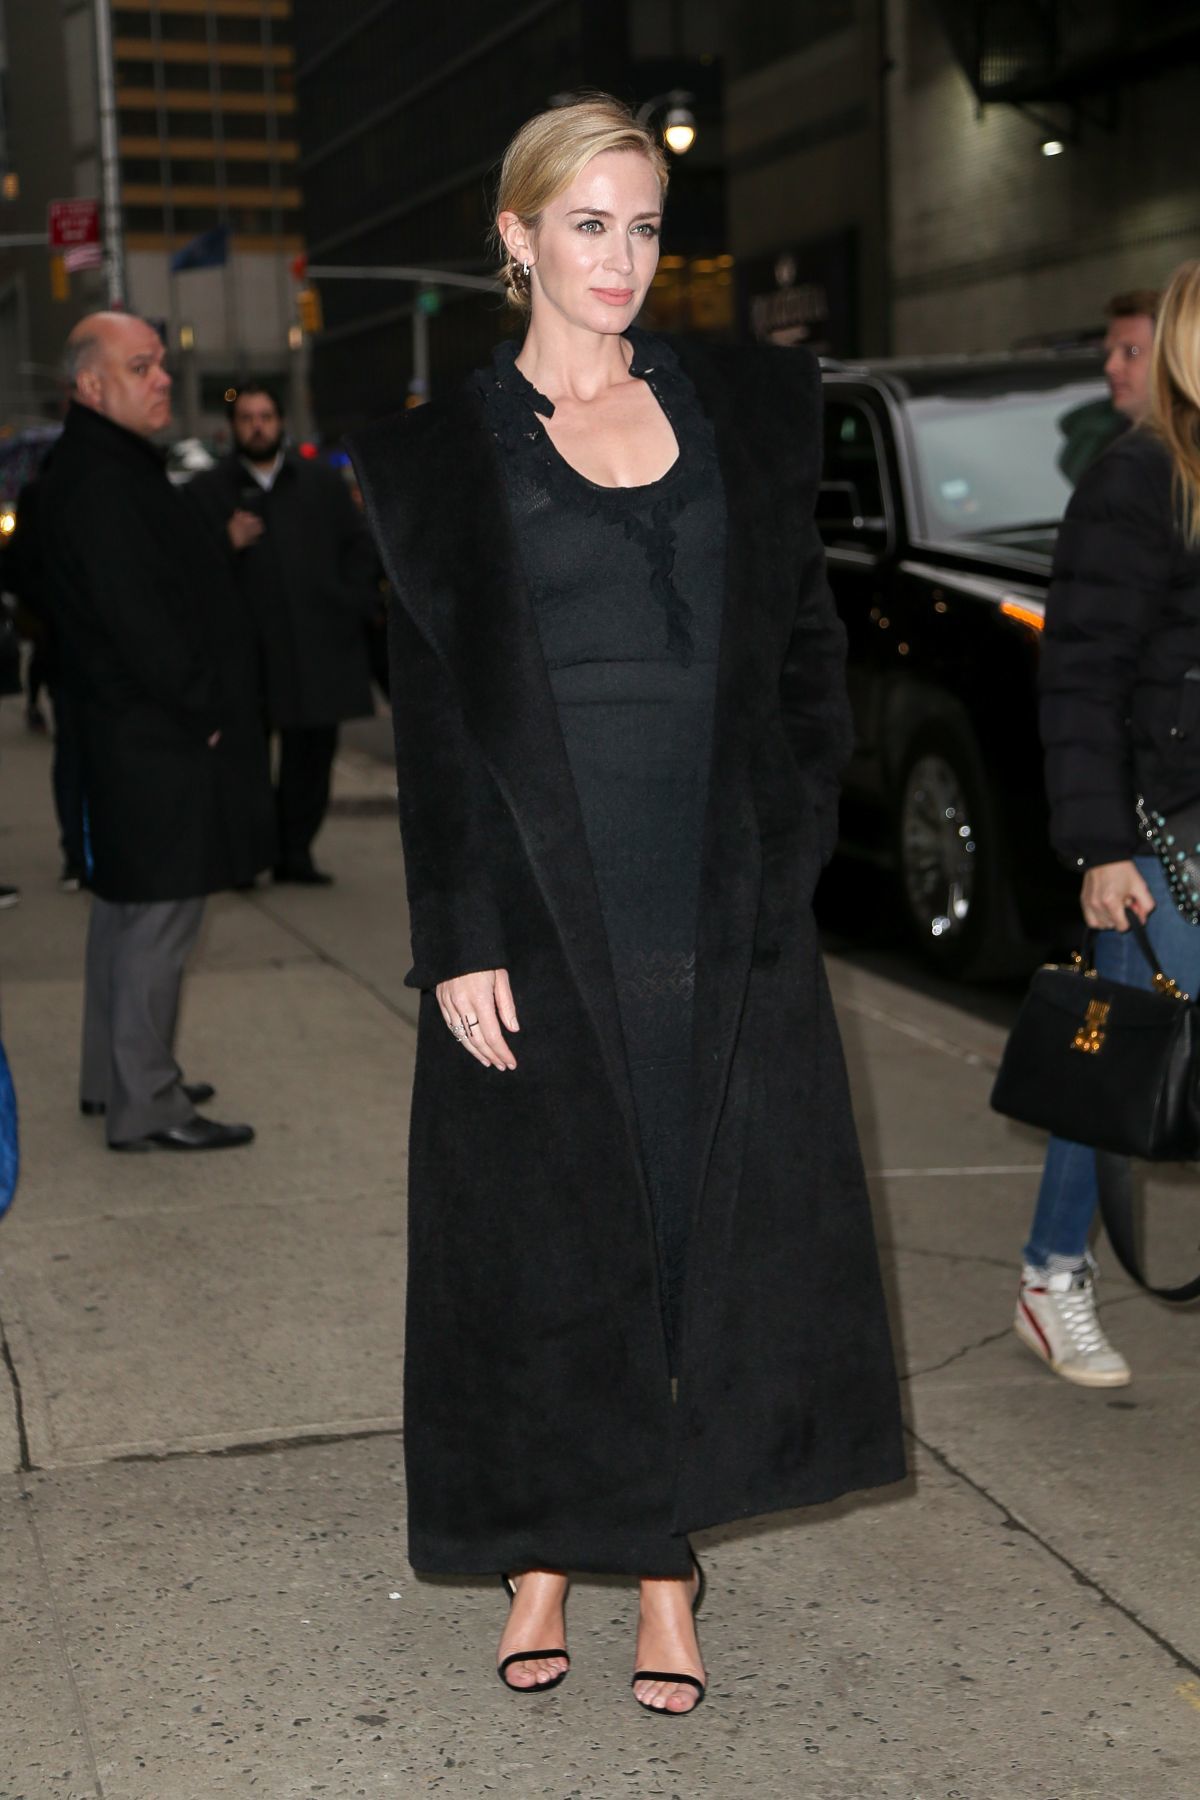 emily-blunt-arriving-at-the-late-show-with-stephen-colbert-in-nyc-32918-2.jpeg